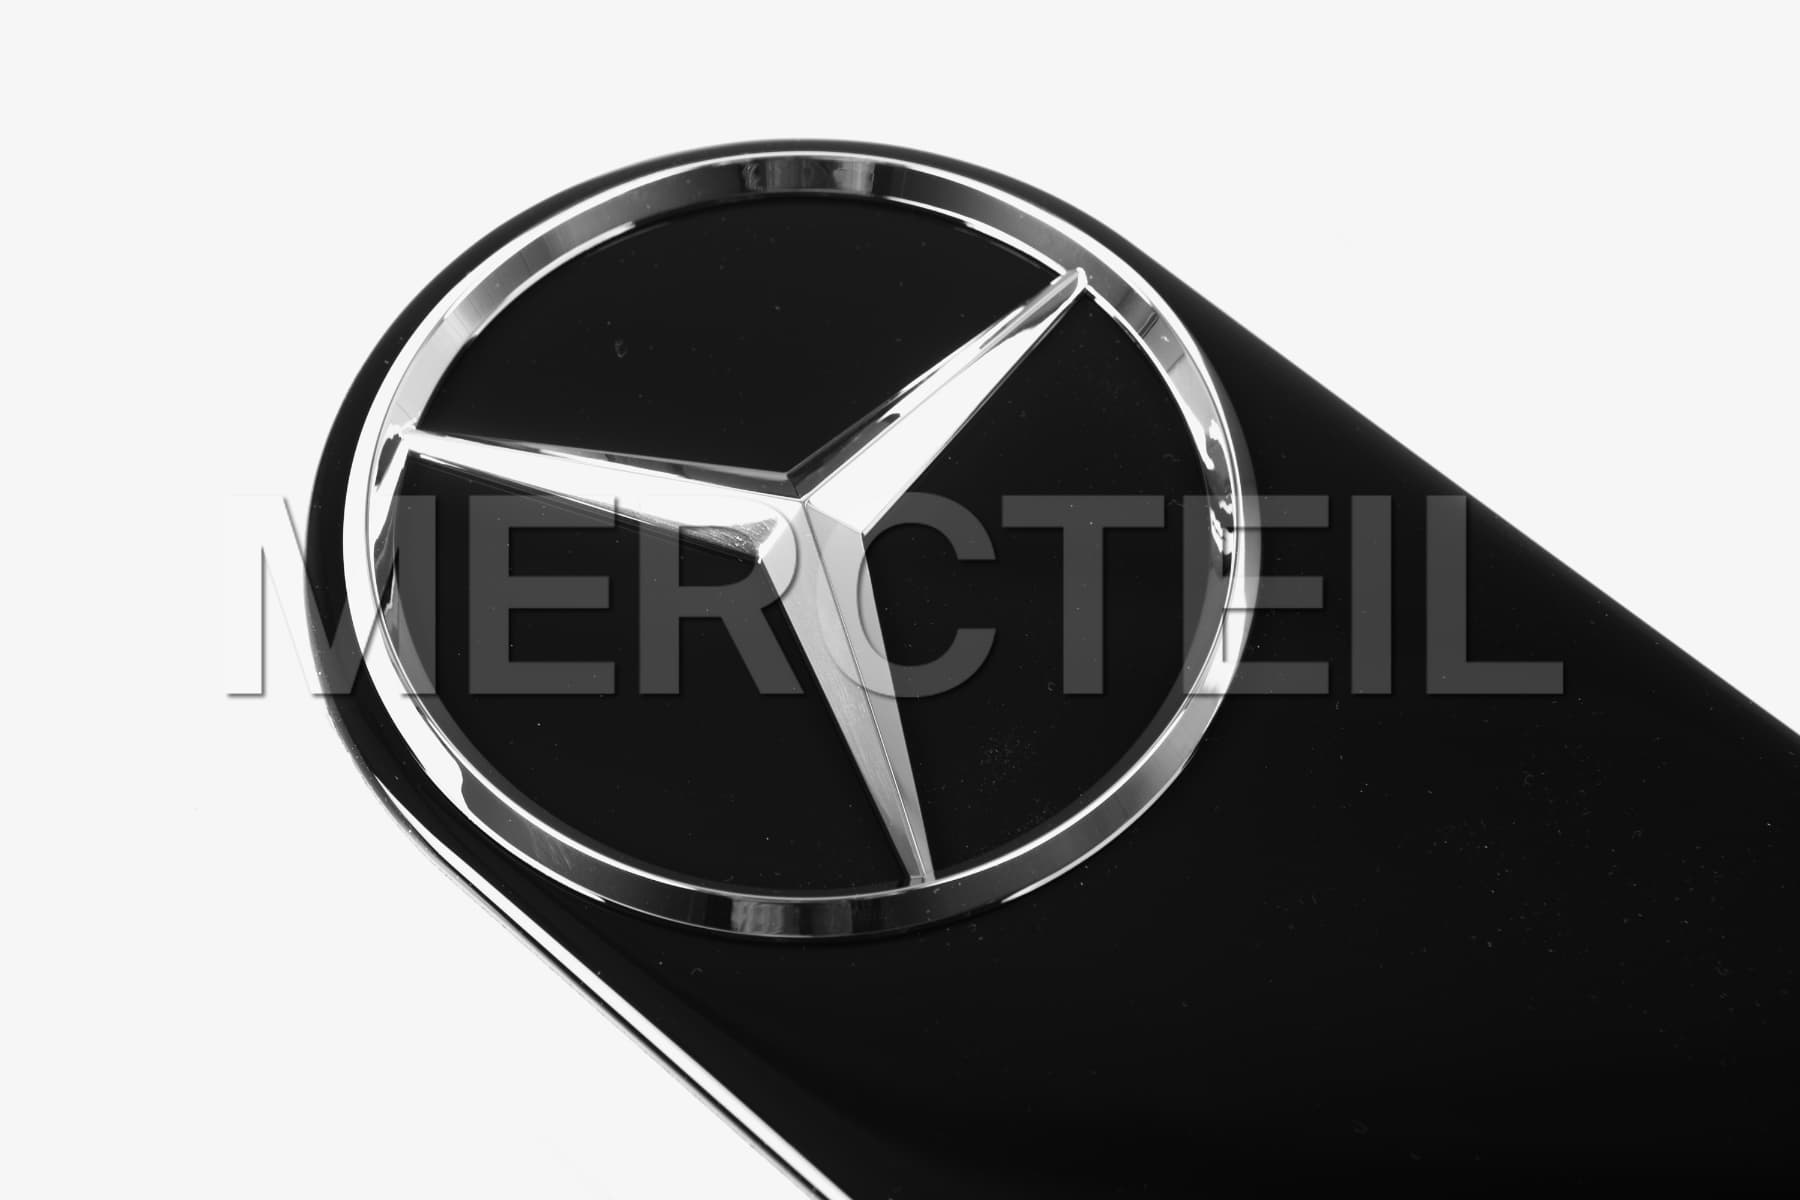 G-Class Spare Wheel Black Mounting Plate with Chrome Emblem W463 W463A Genuine Mercedes-Benz (Part number: A4638901744)